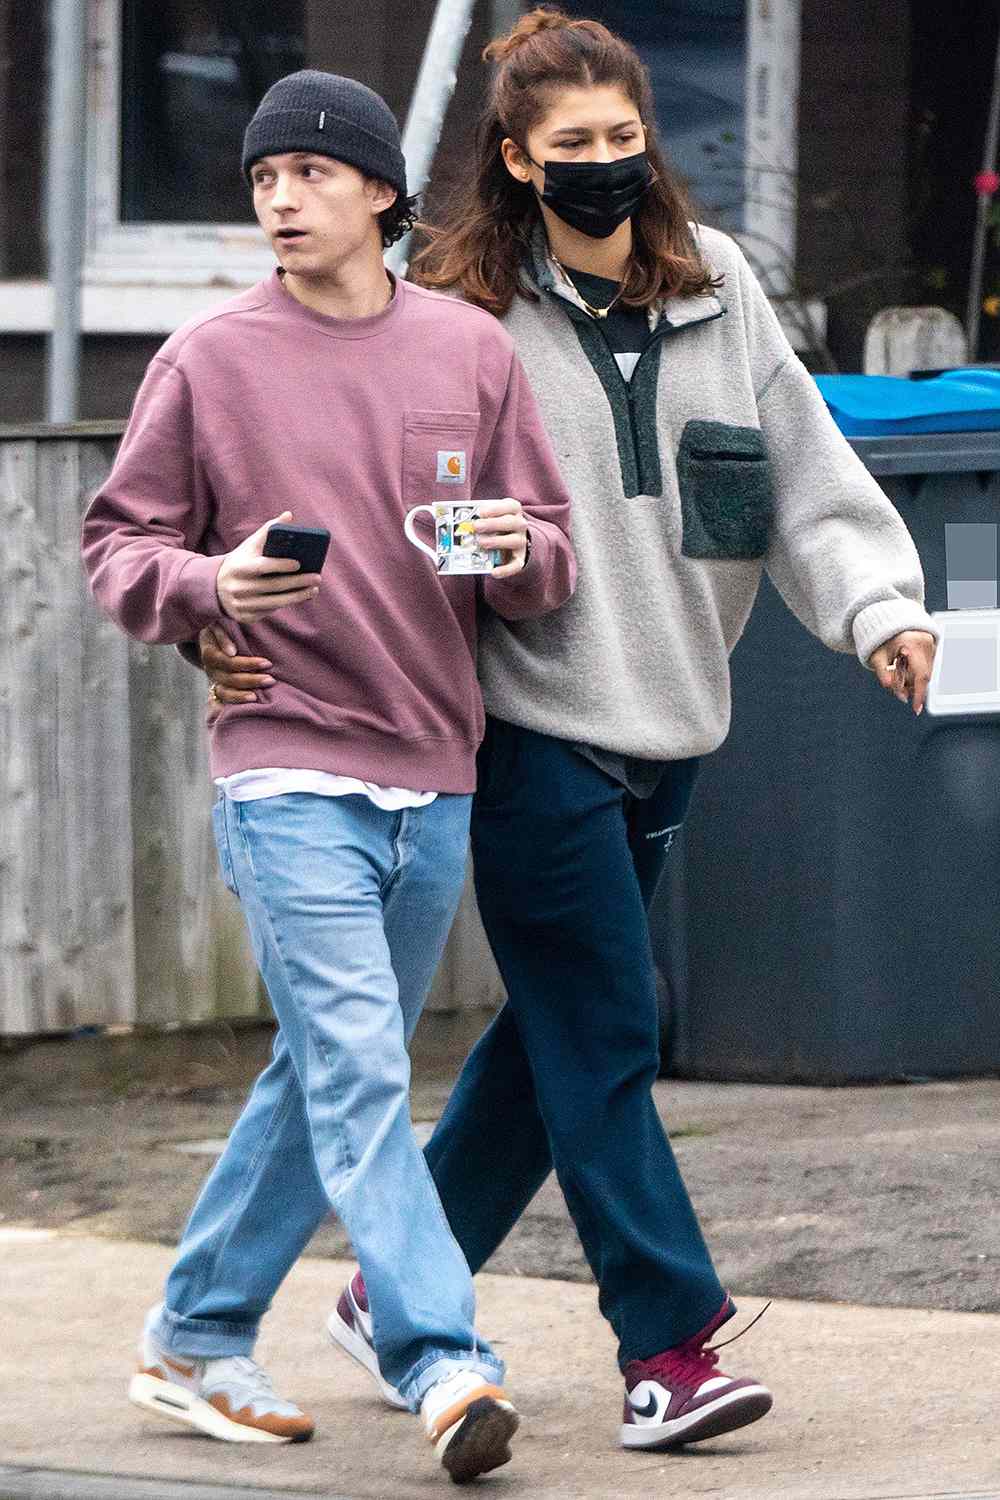 Zendaya Joins Tom Holland to Visit His Family in London | PEOPLE.com